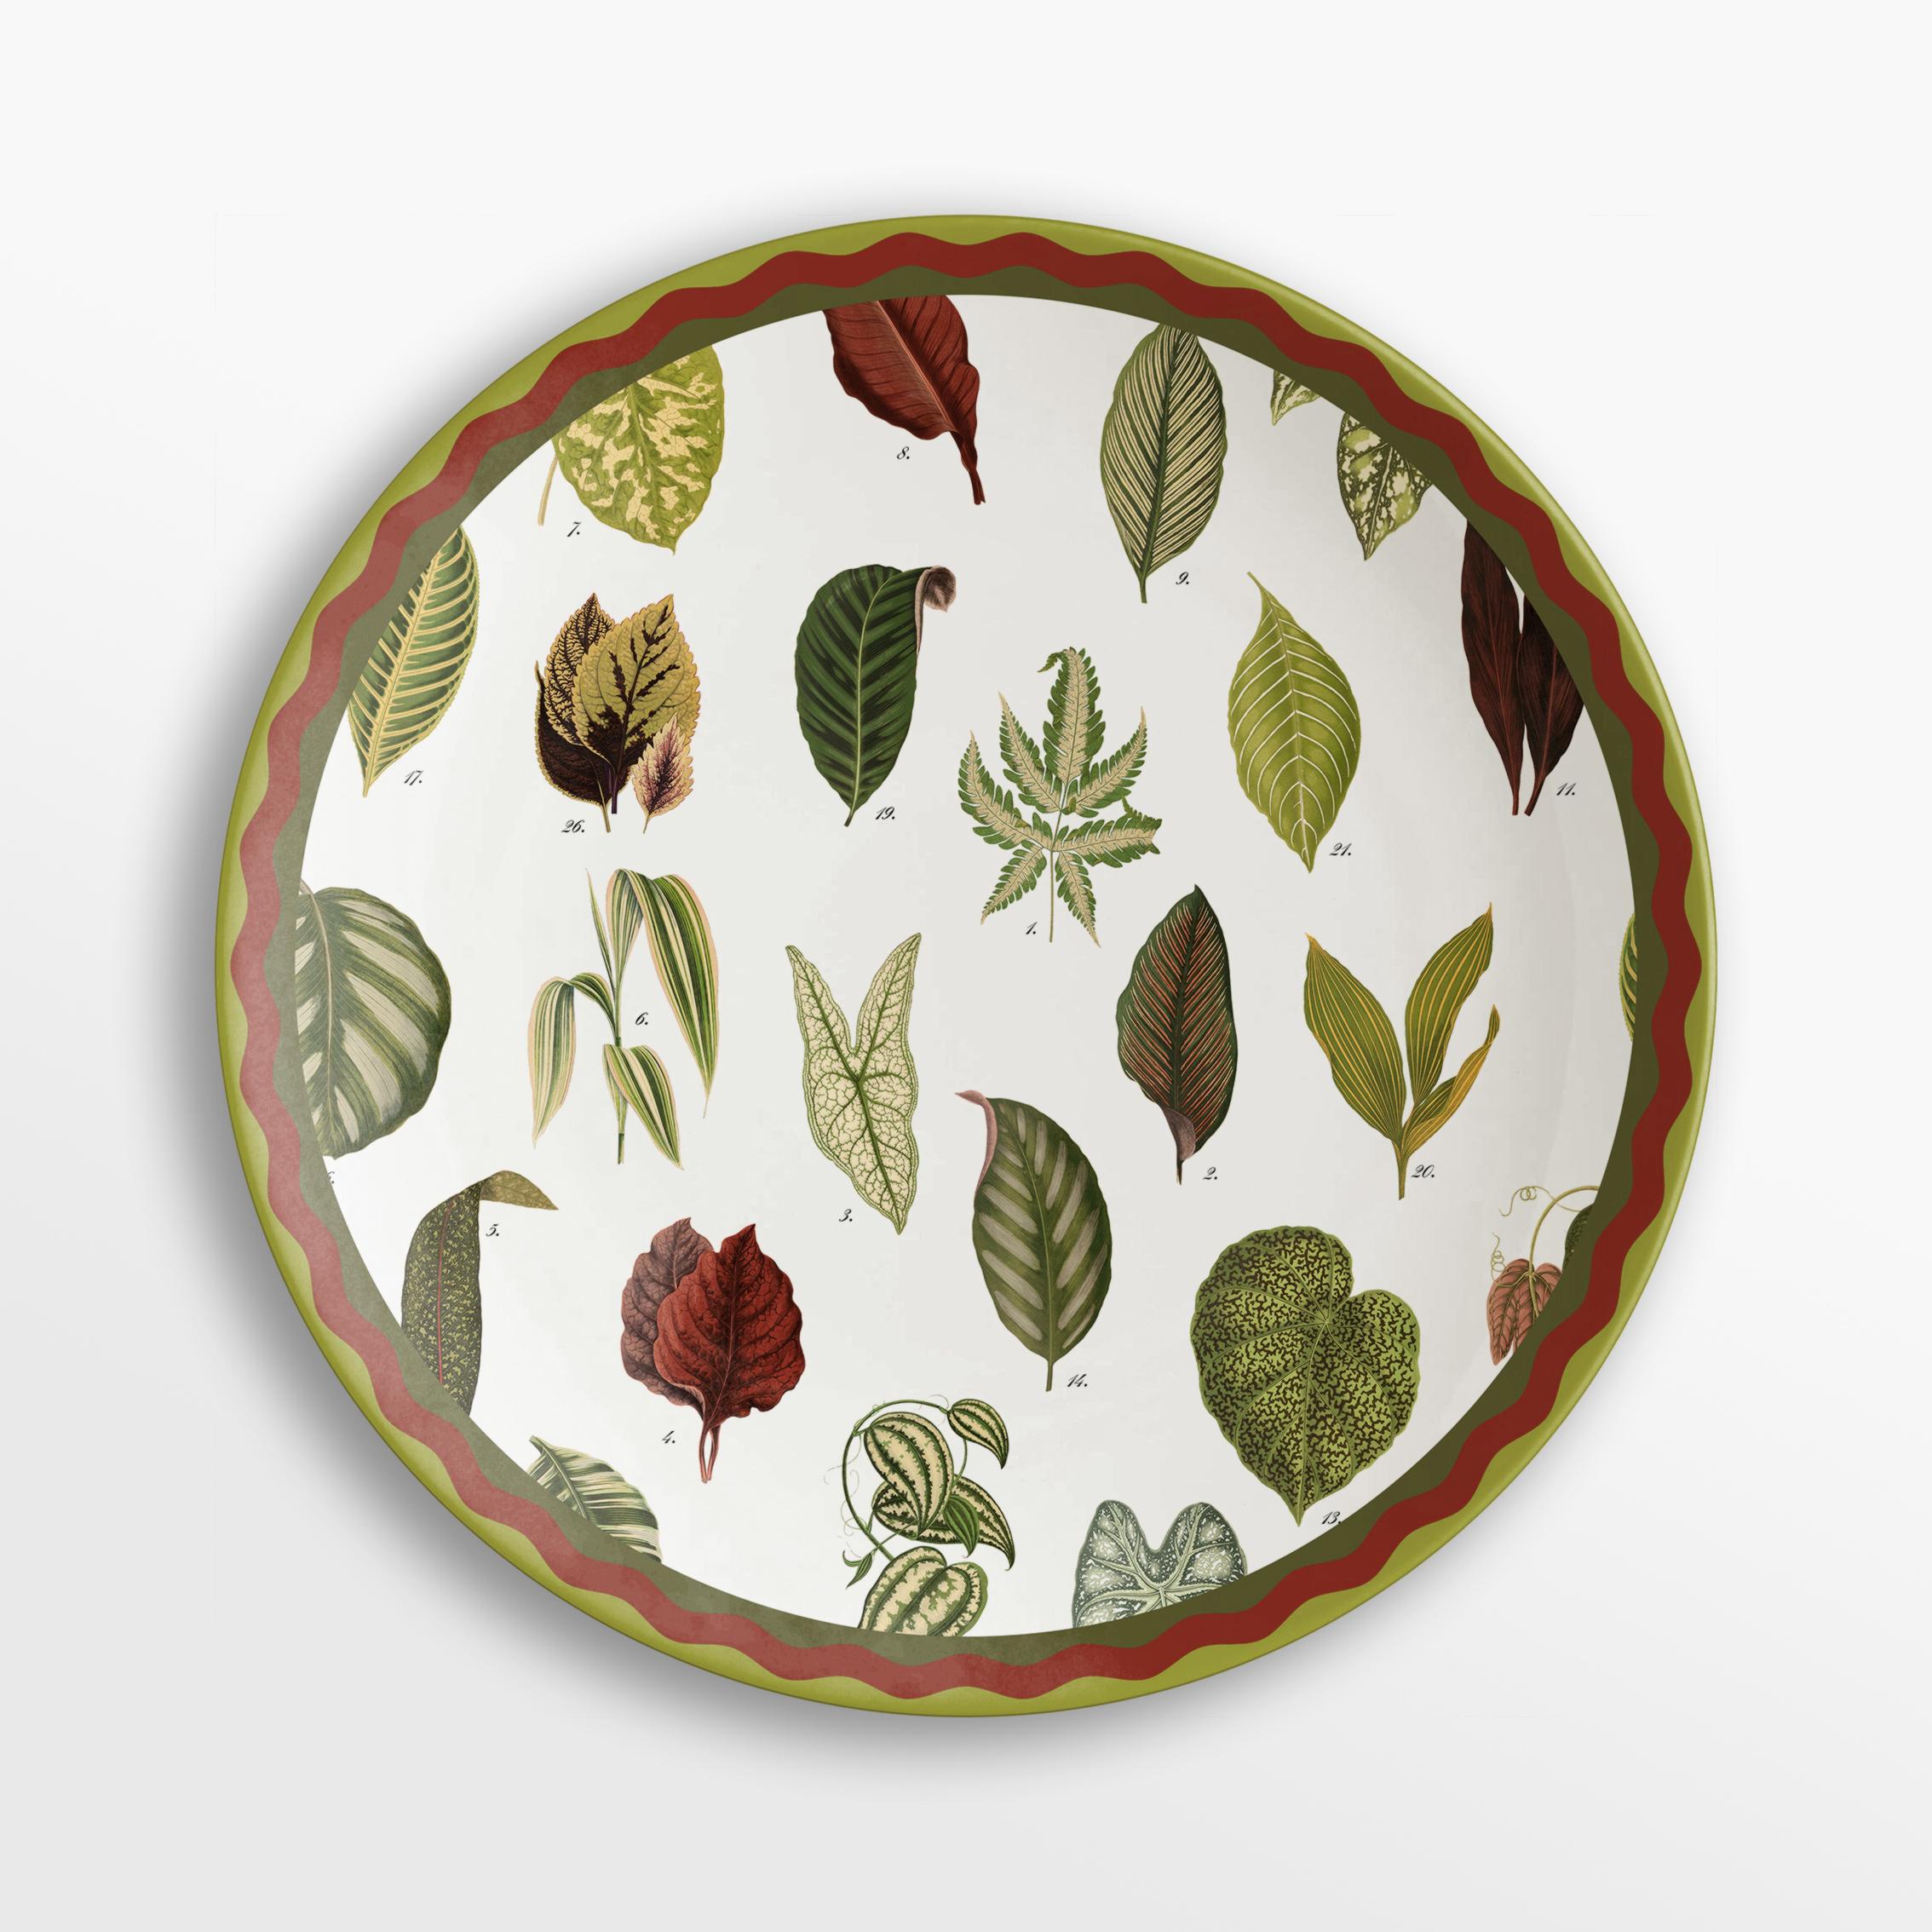 Cabinet de Curiosités, Six Contemporary Decorated Porcelain Dinner Plates In New Condition For Sale In Milano, Lombardia